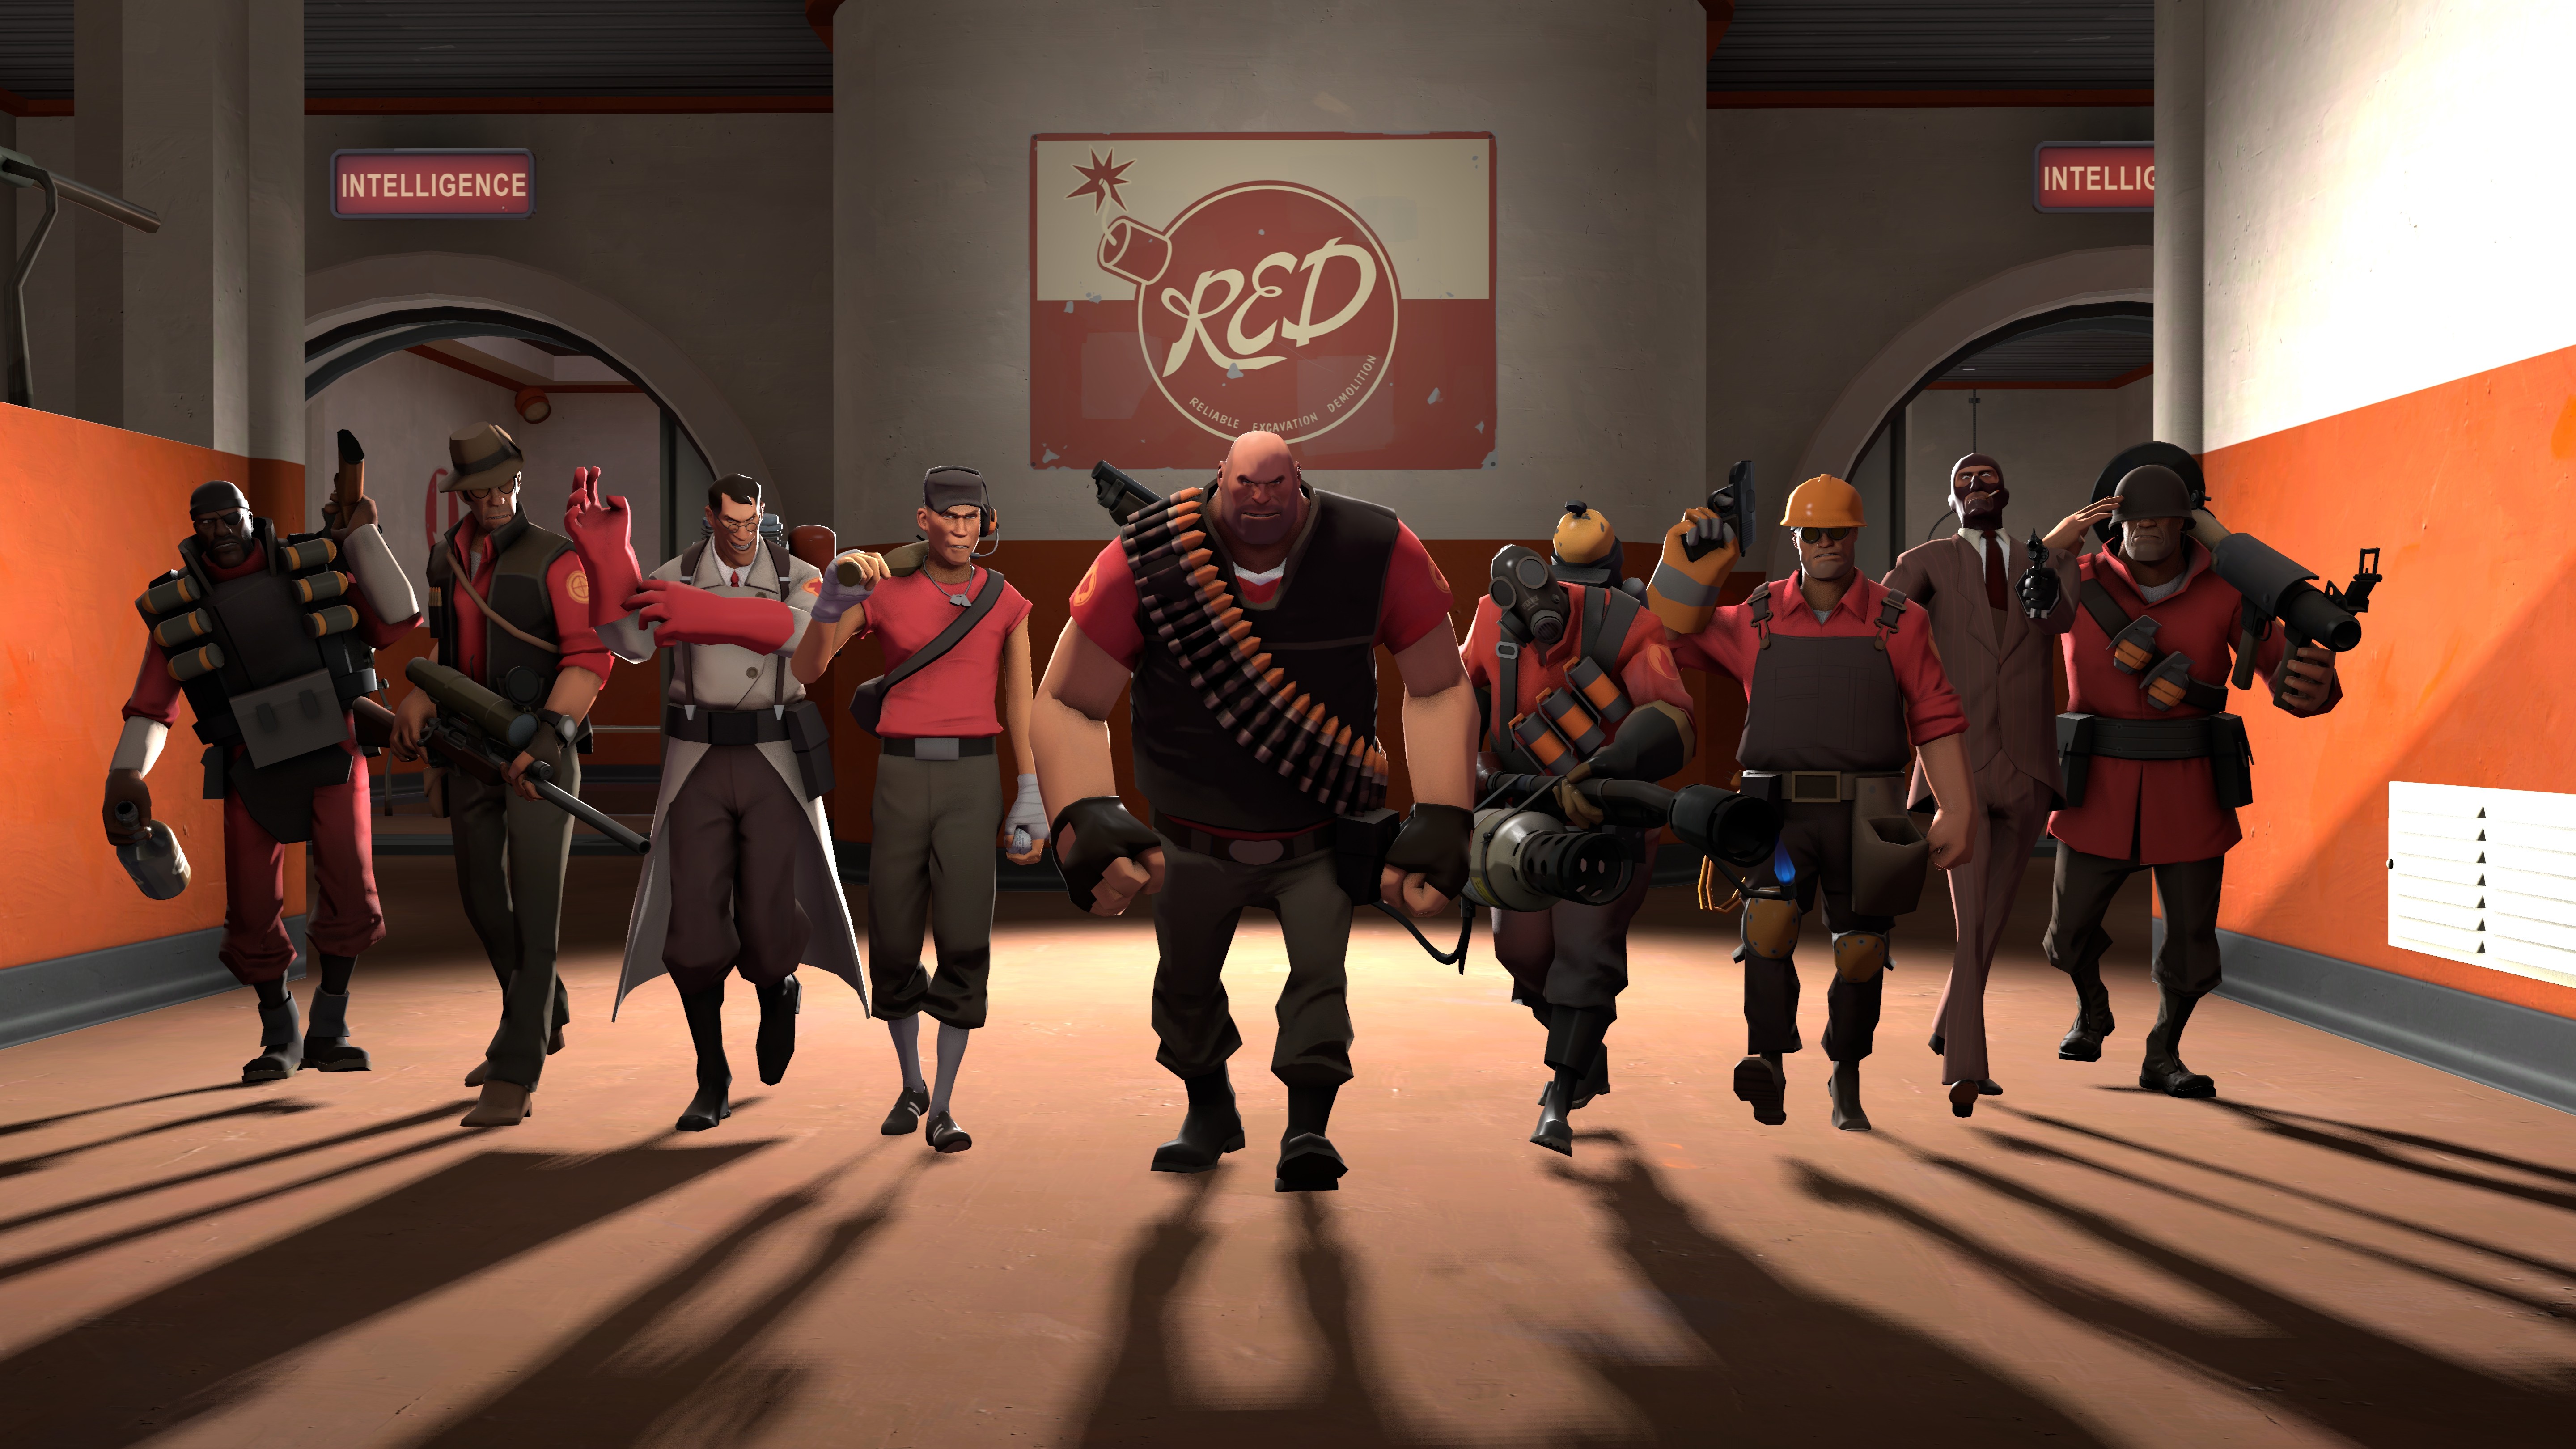 HQ Team Fortress 2 Wallpapers | File 1945.85Kb